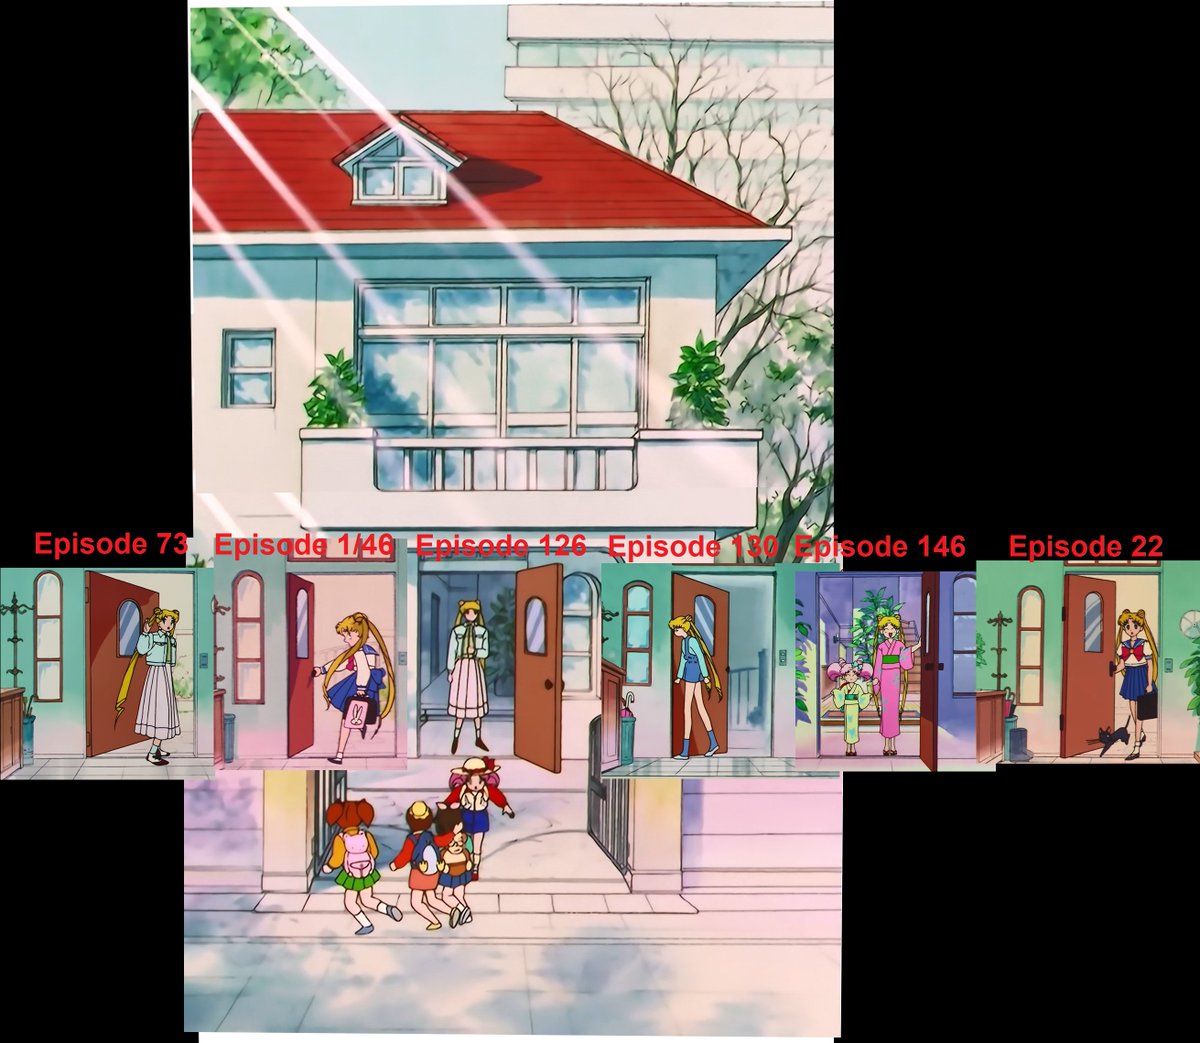 Lunar Archivist On Twitter Here S The Beginning Of An Attempt To Calculate The Size Of The Tsukino Residence Based On Usagi S Height Of 150 Cm 4 Feet 11 Inches And Comparisons From One centimeter is equal to 0.0328084 feet how to convert 10cm to feet. height of 150 cm 4 feet 11 inches